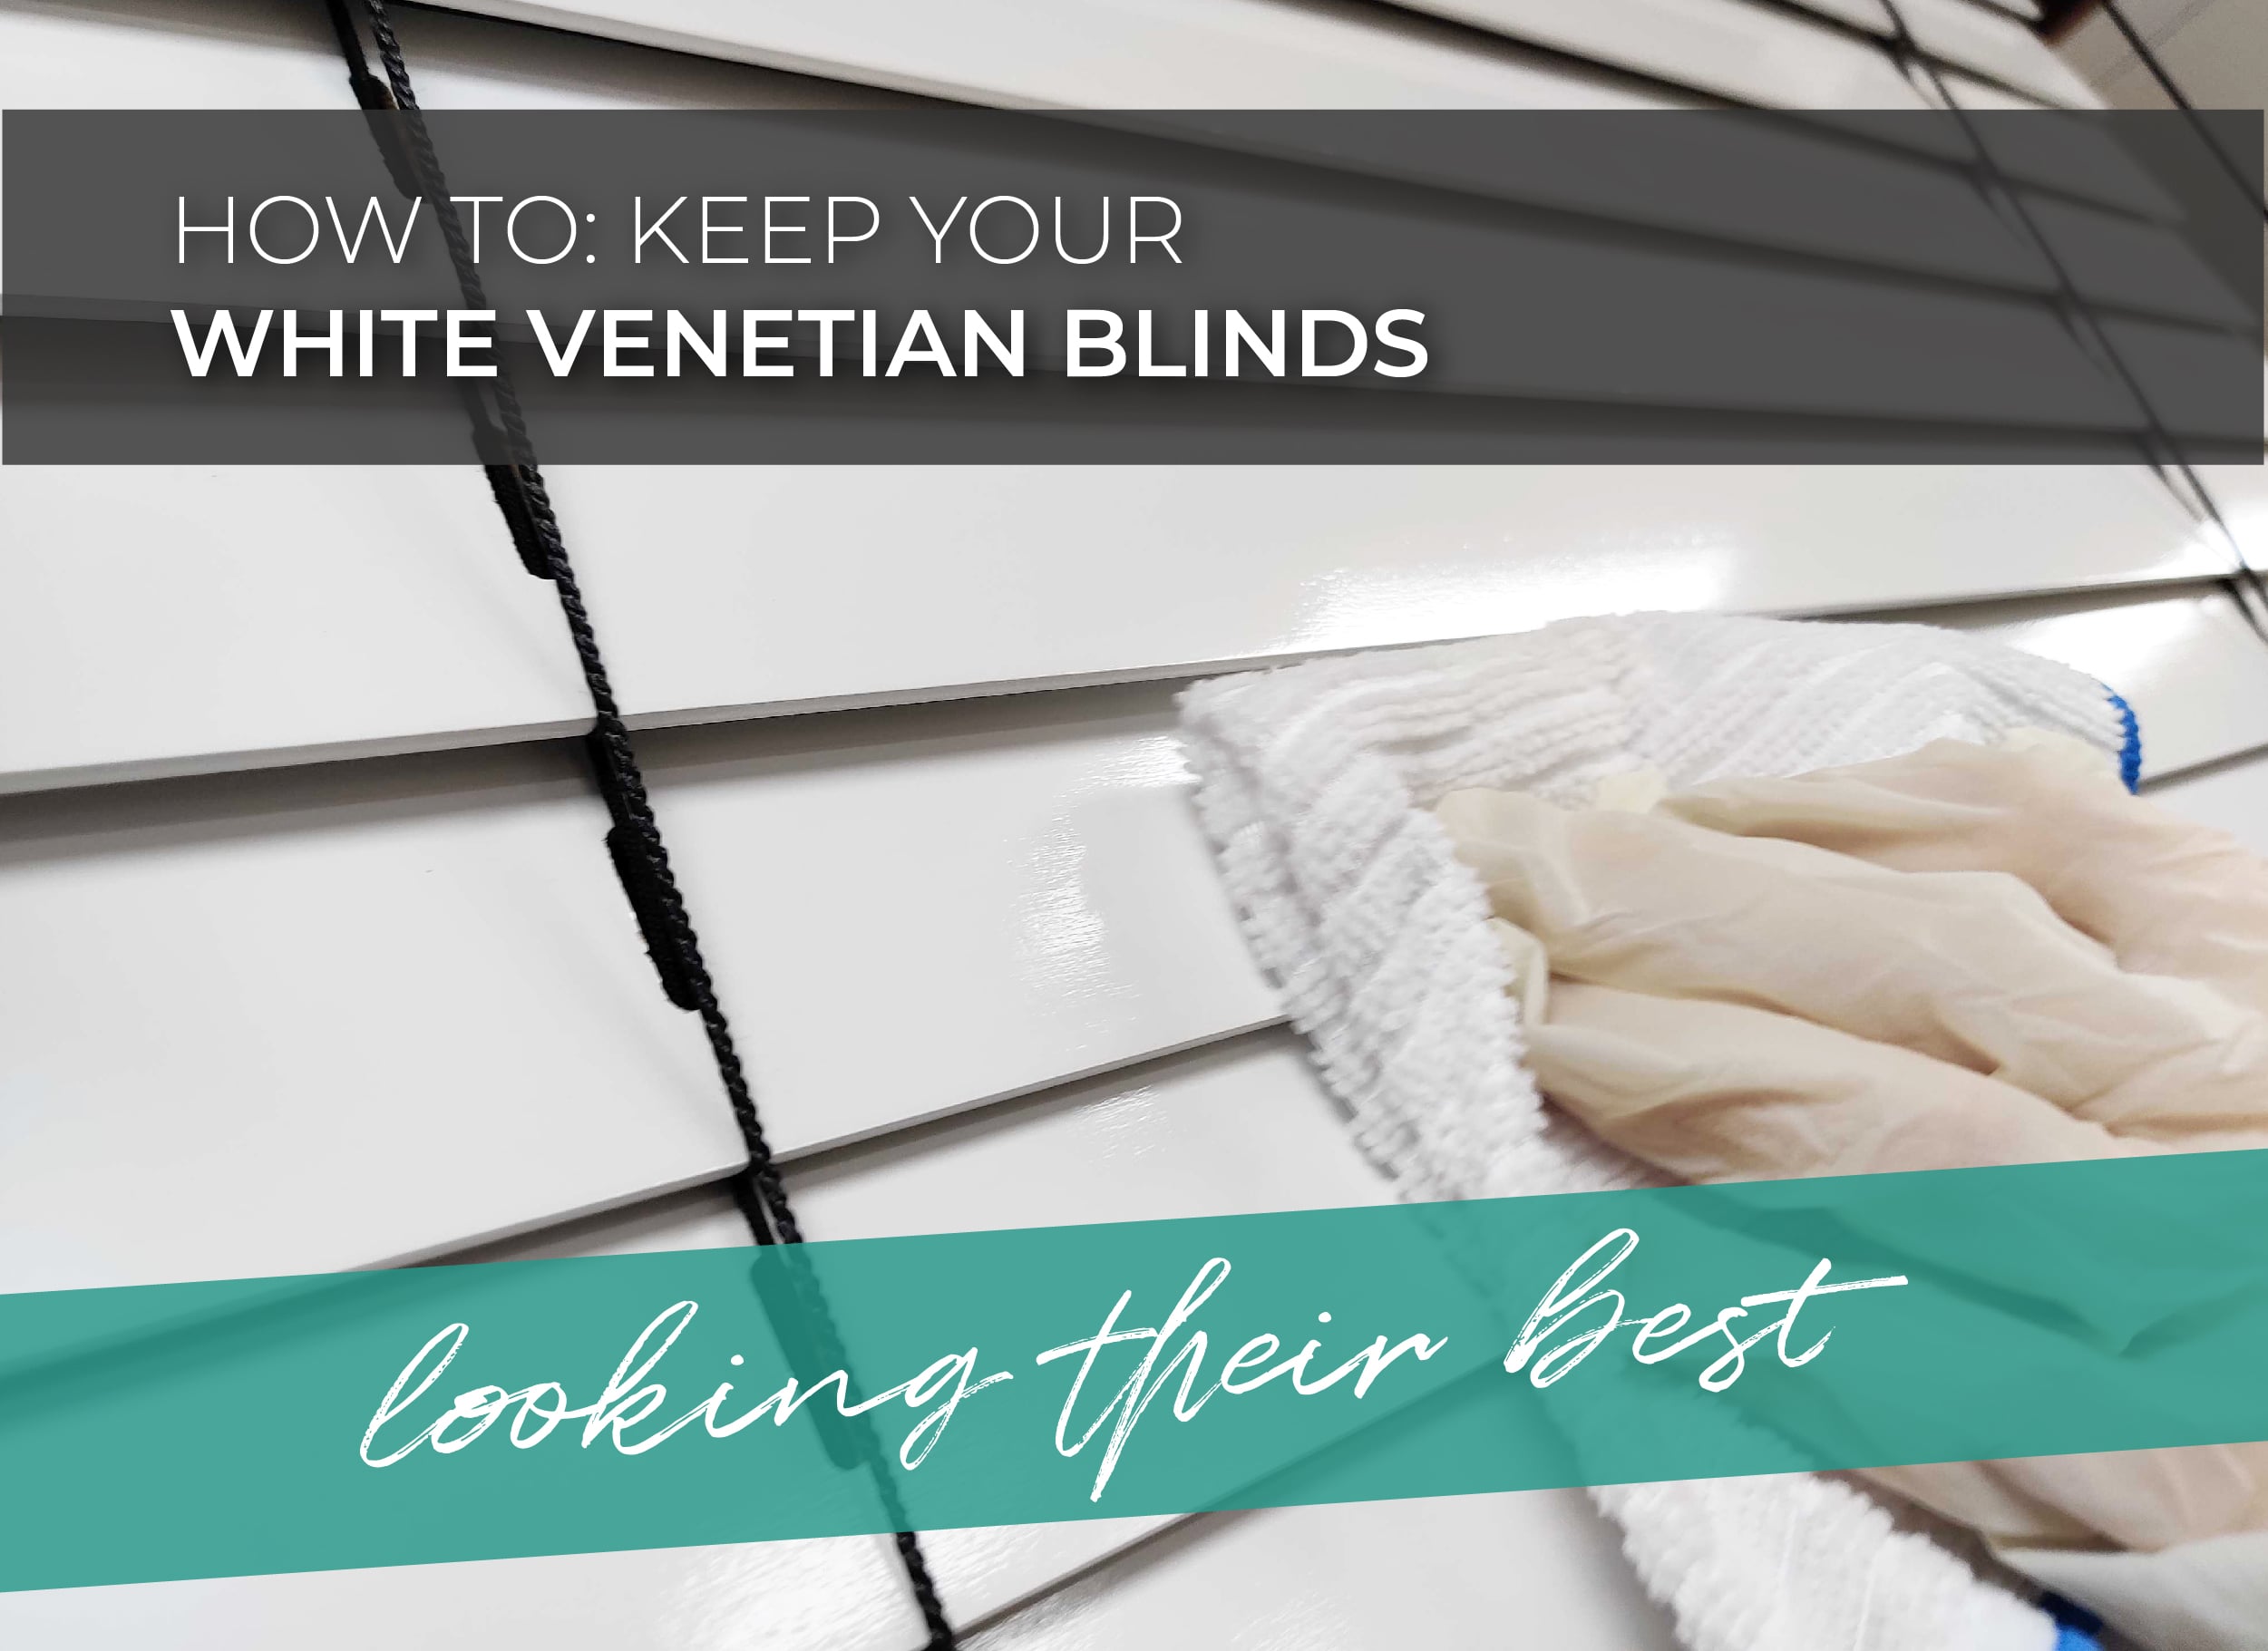 How to keep your White Venetian blinds looking their best